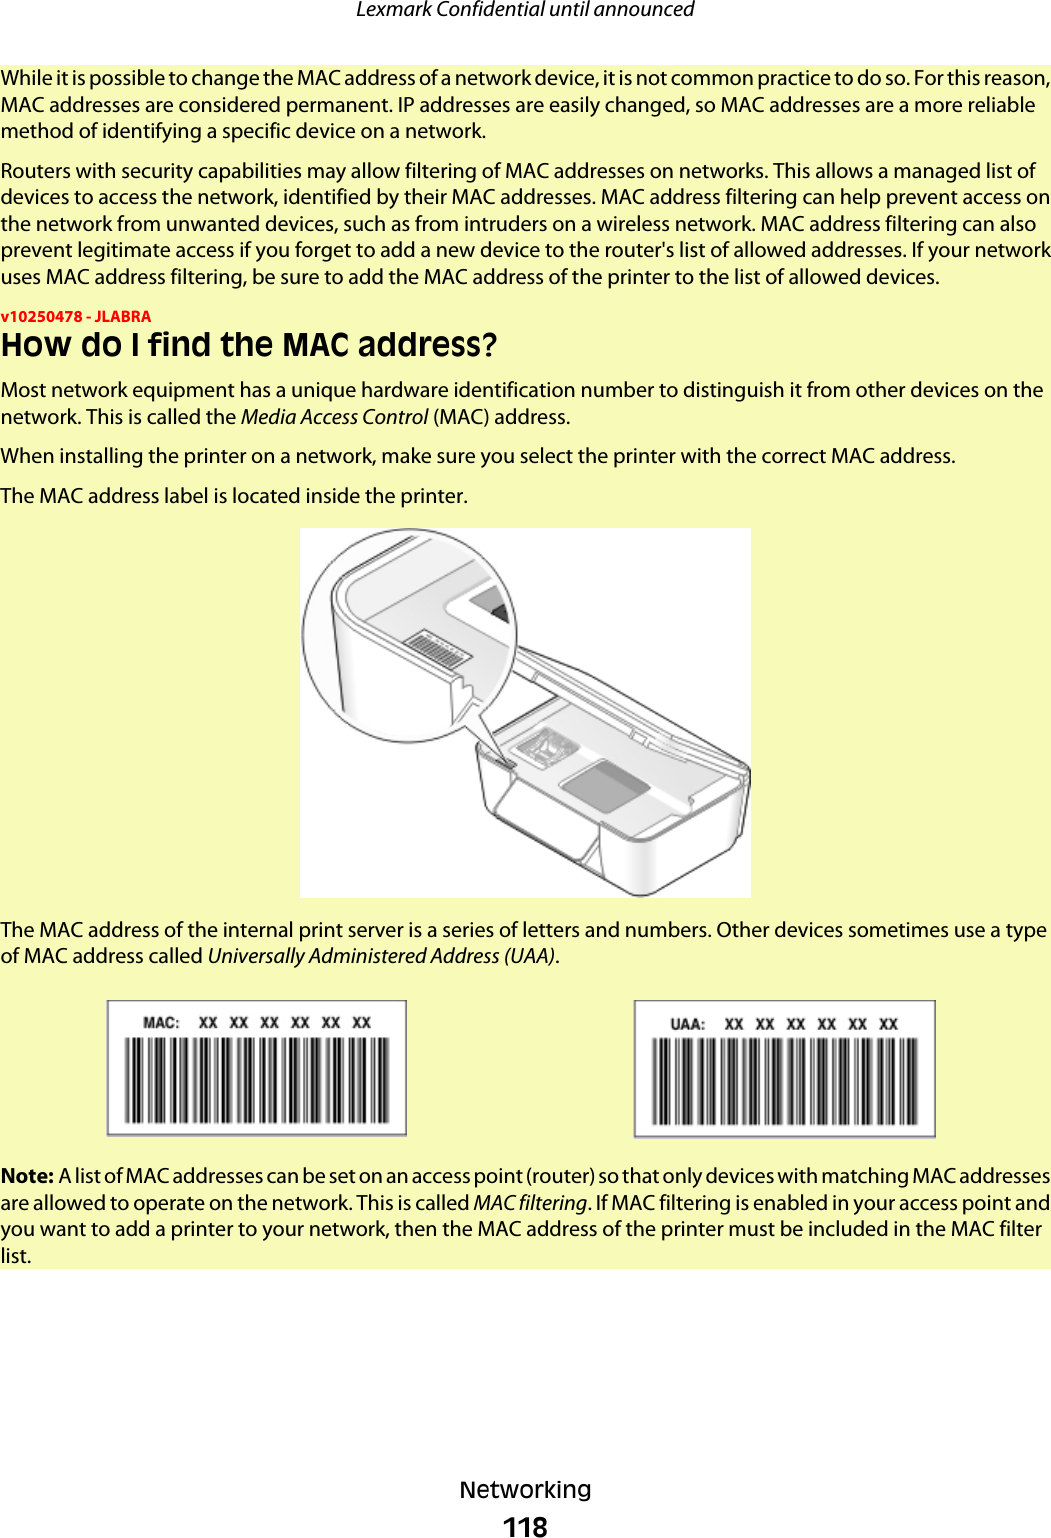 While it is possible to change the MAC address of a network device, it is not common practice to do so. For this reason,MAC addresses are considered permanent. IP addresses are easily changed, so MAC addresses are a more reliablemethod of identifying a specific device on a network.Routers with security capabilities may allow filtering of MAC addresses on networks. This allows a managed list ofdevices to access the network, identified by their MAC addresses. MAC address filtering can help prevent access onthe network from unwanted devices, such as from intruders on a wireless network. MAC address filtering can alsoprevent legitimate access if you forget to add a new device to the router&apos;s list of allowed addresses. If your networkuses MAC address filtering, be sure to add the MAC address of the printer to the list of allowed devices.v10250478 - JLABRAHow do I find the MAC address?Most network equipment has a unique hardware identification number to distinguish it from other devices on thenetwork. This is called the Media Access Control (MAC) address.When installing the printer on a network, make sure you select the printer with the correct MAC address.The MAC address label is located inside the printer.The MAC address of the internal print server is a series of letters and numbers. Other devices sometimes use a typeof MAC address called Universally Administered Address (UAA).Note: A list of MAC addresses can be set on an access point (router) so that only devices with matching MAC addressesare allowed to operate on the network. This is called MAC filtering. If MAC filtering is enabled in your access point andyou want to add a printer to your network, then the MAC address of the printer must be included in the MAC filterlist.Lexmark Confidential until announcedNetworking118